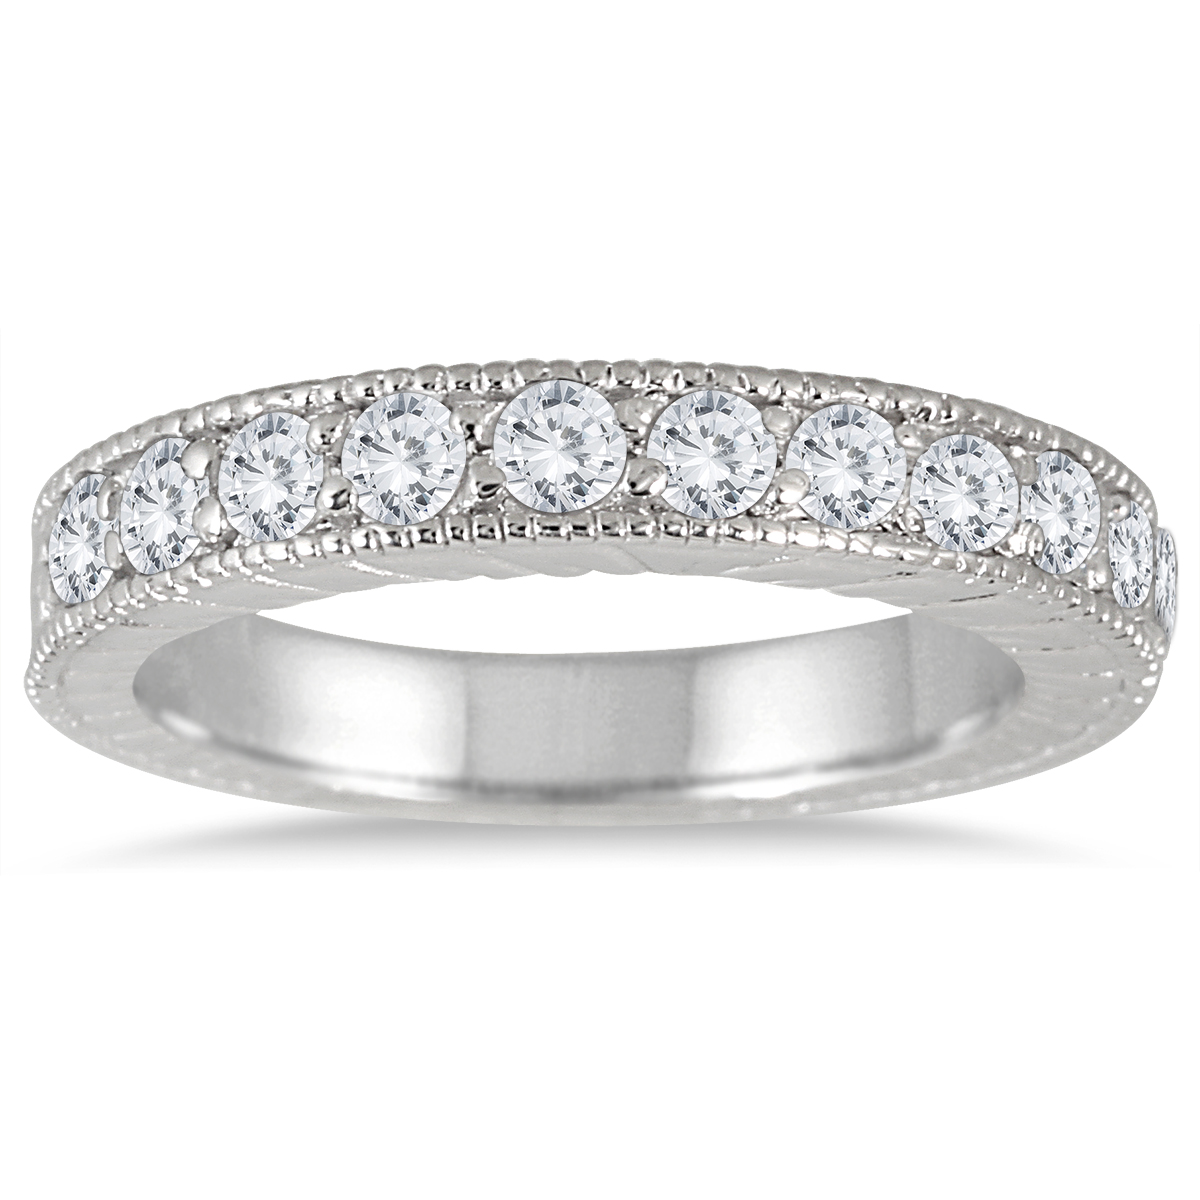 1/2 Carat TW Antique Styled Engraved Diamond Band in 10K White Gold